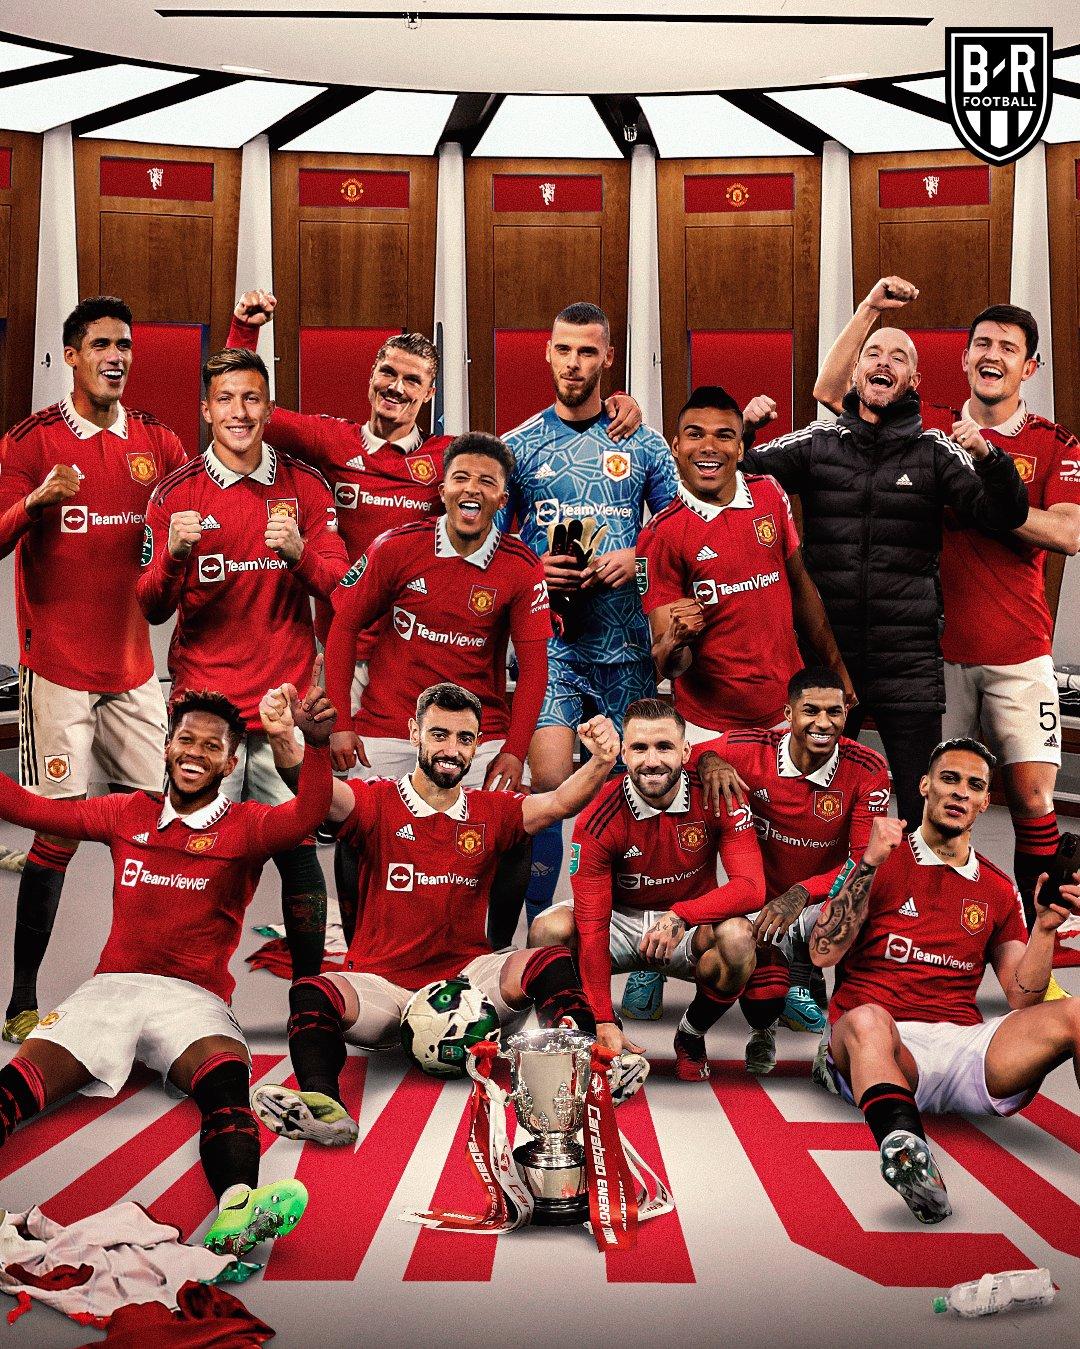 B R Football On Manchester United Win The League Cup